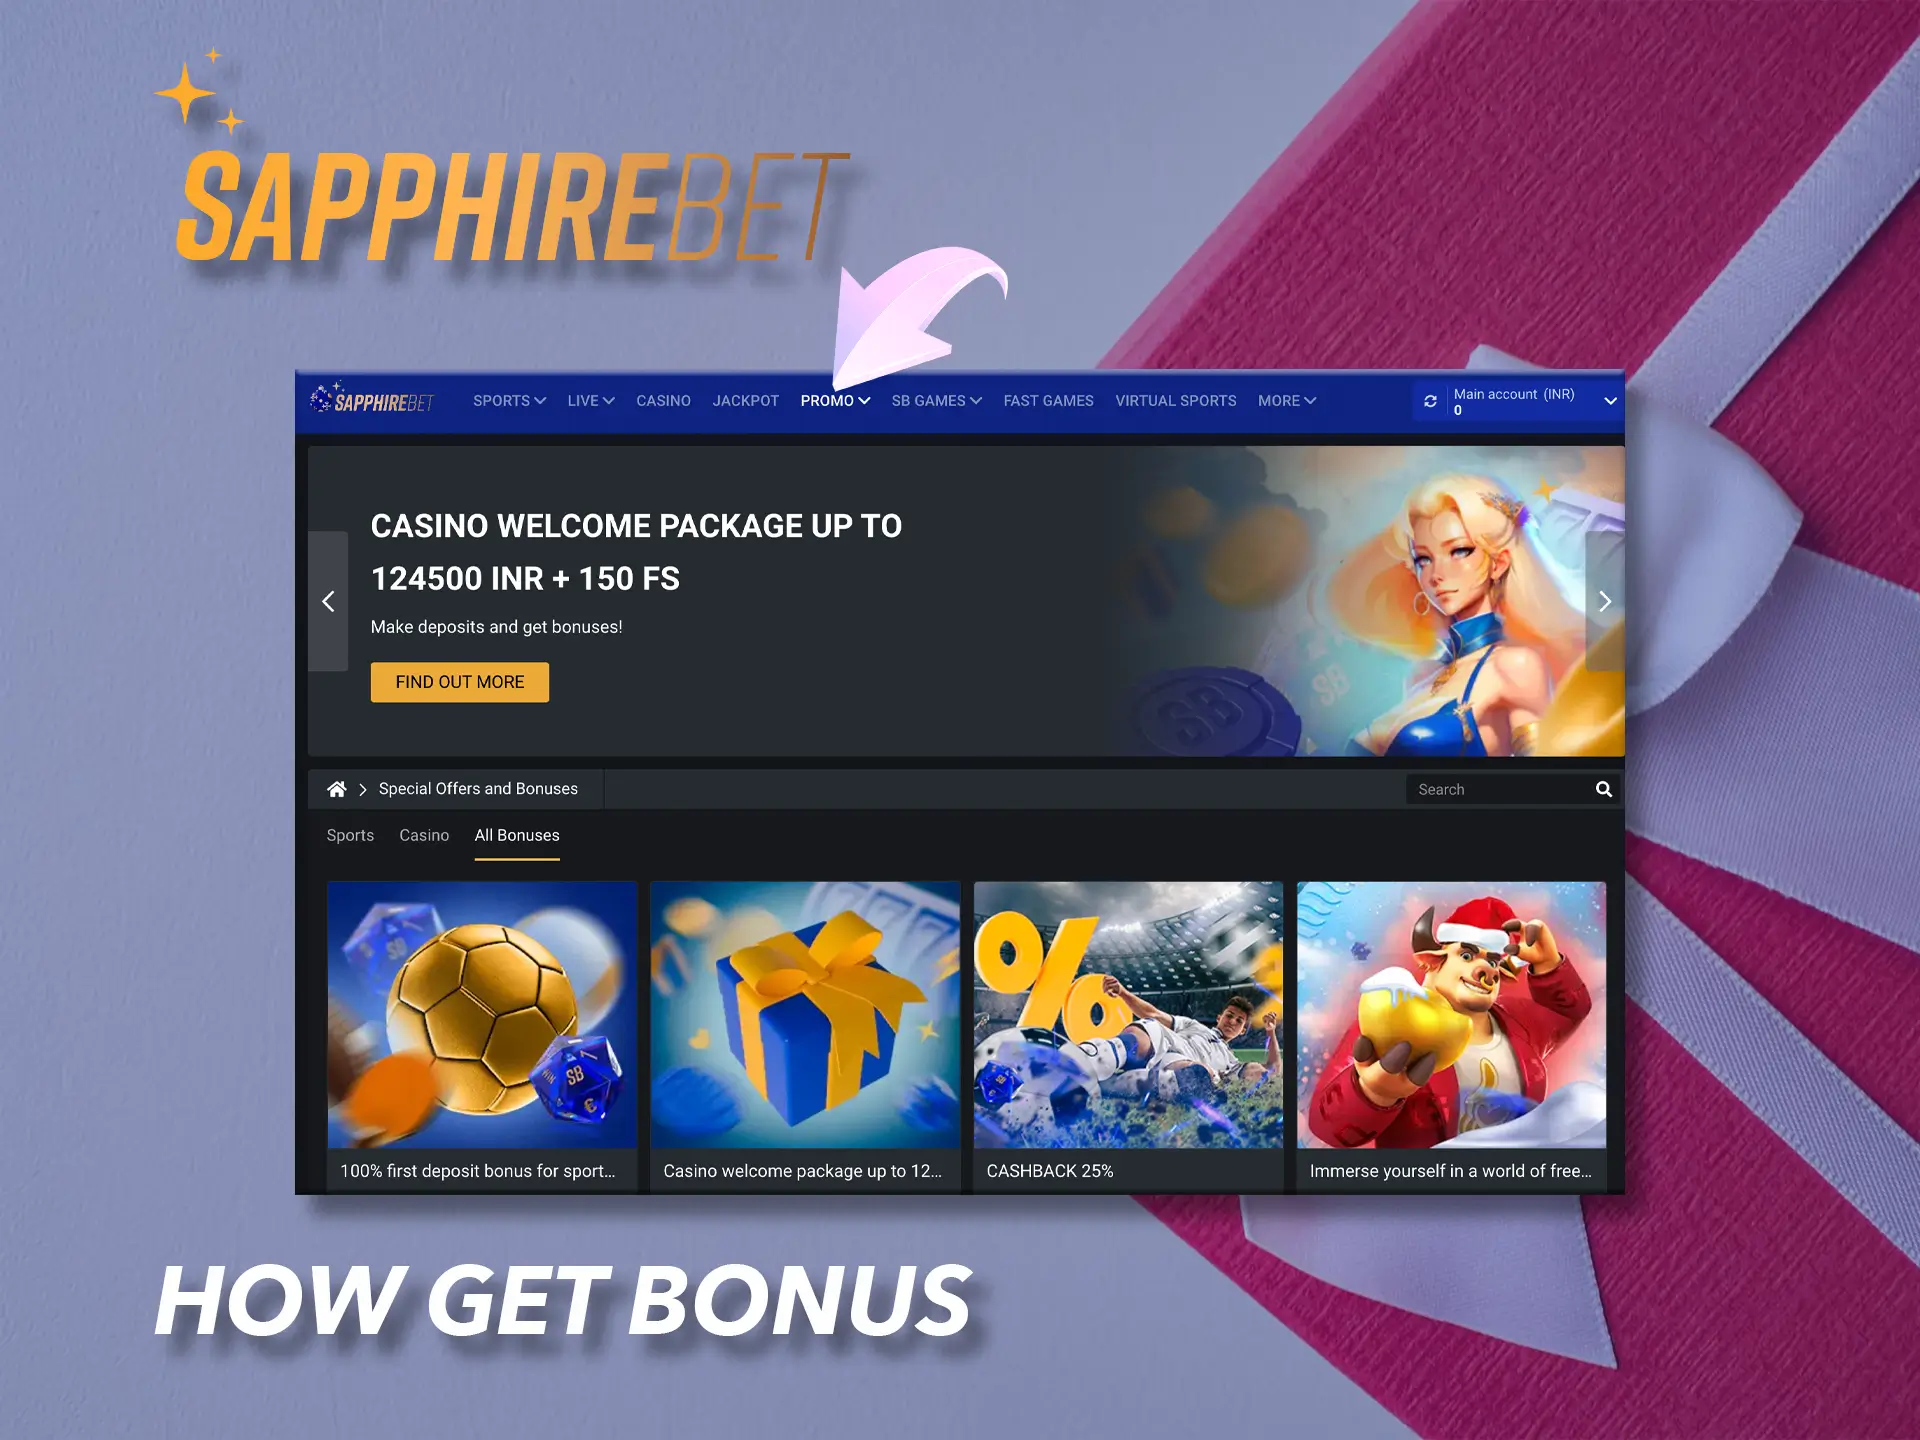 Access your first bonus from Sapphirebet immediately after depositing.